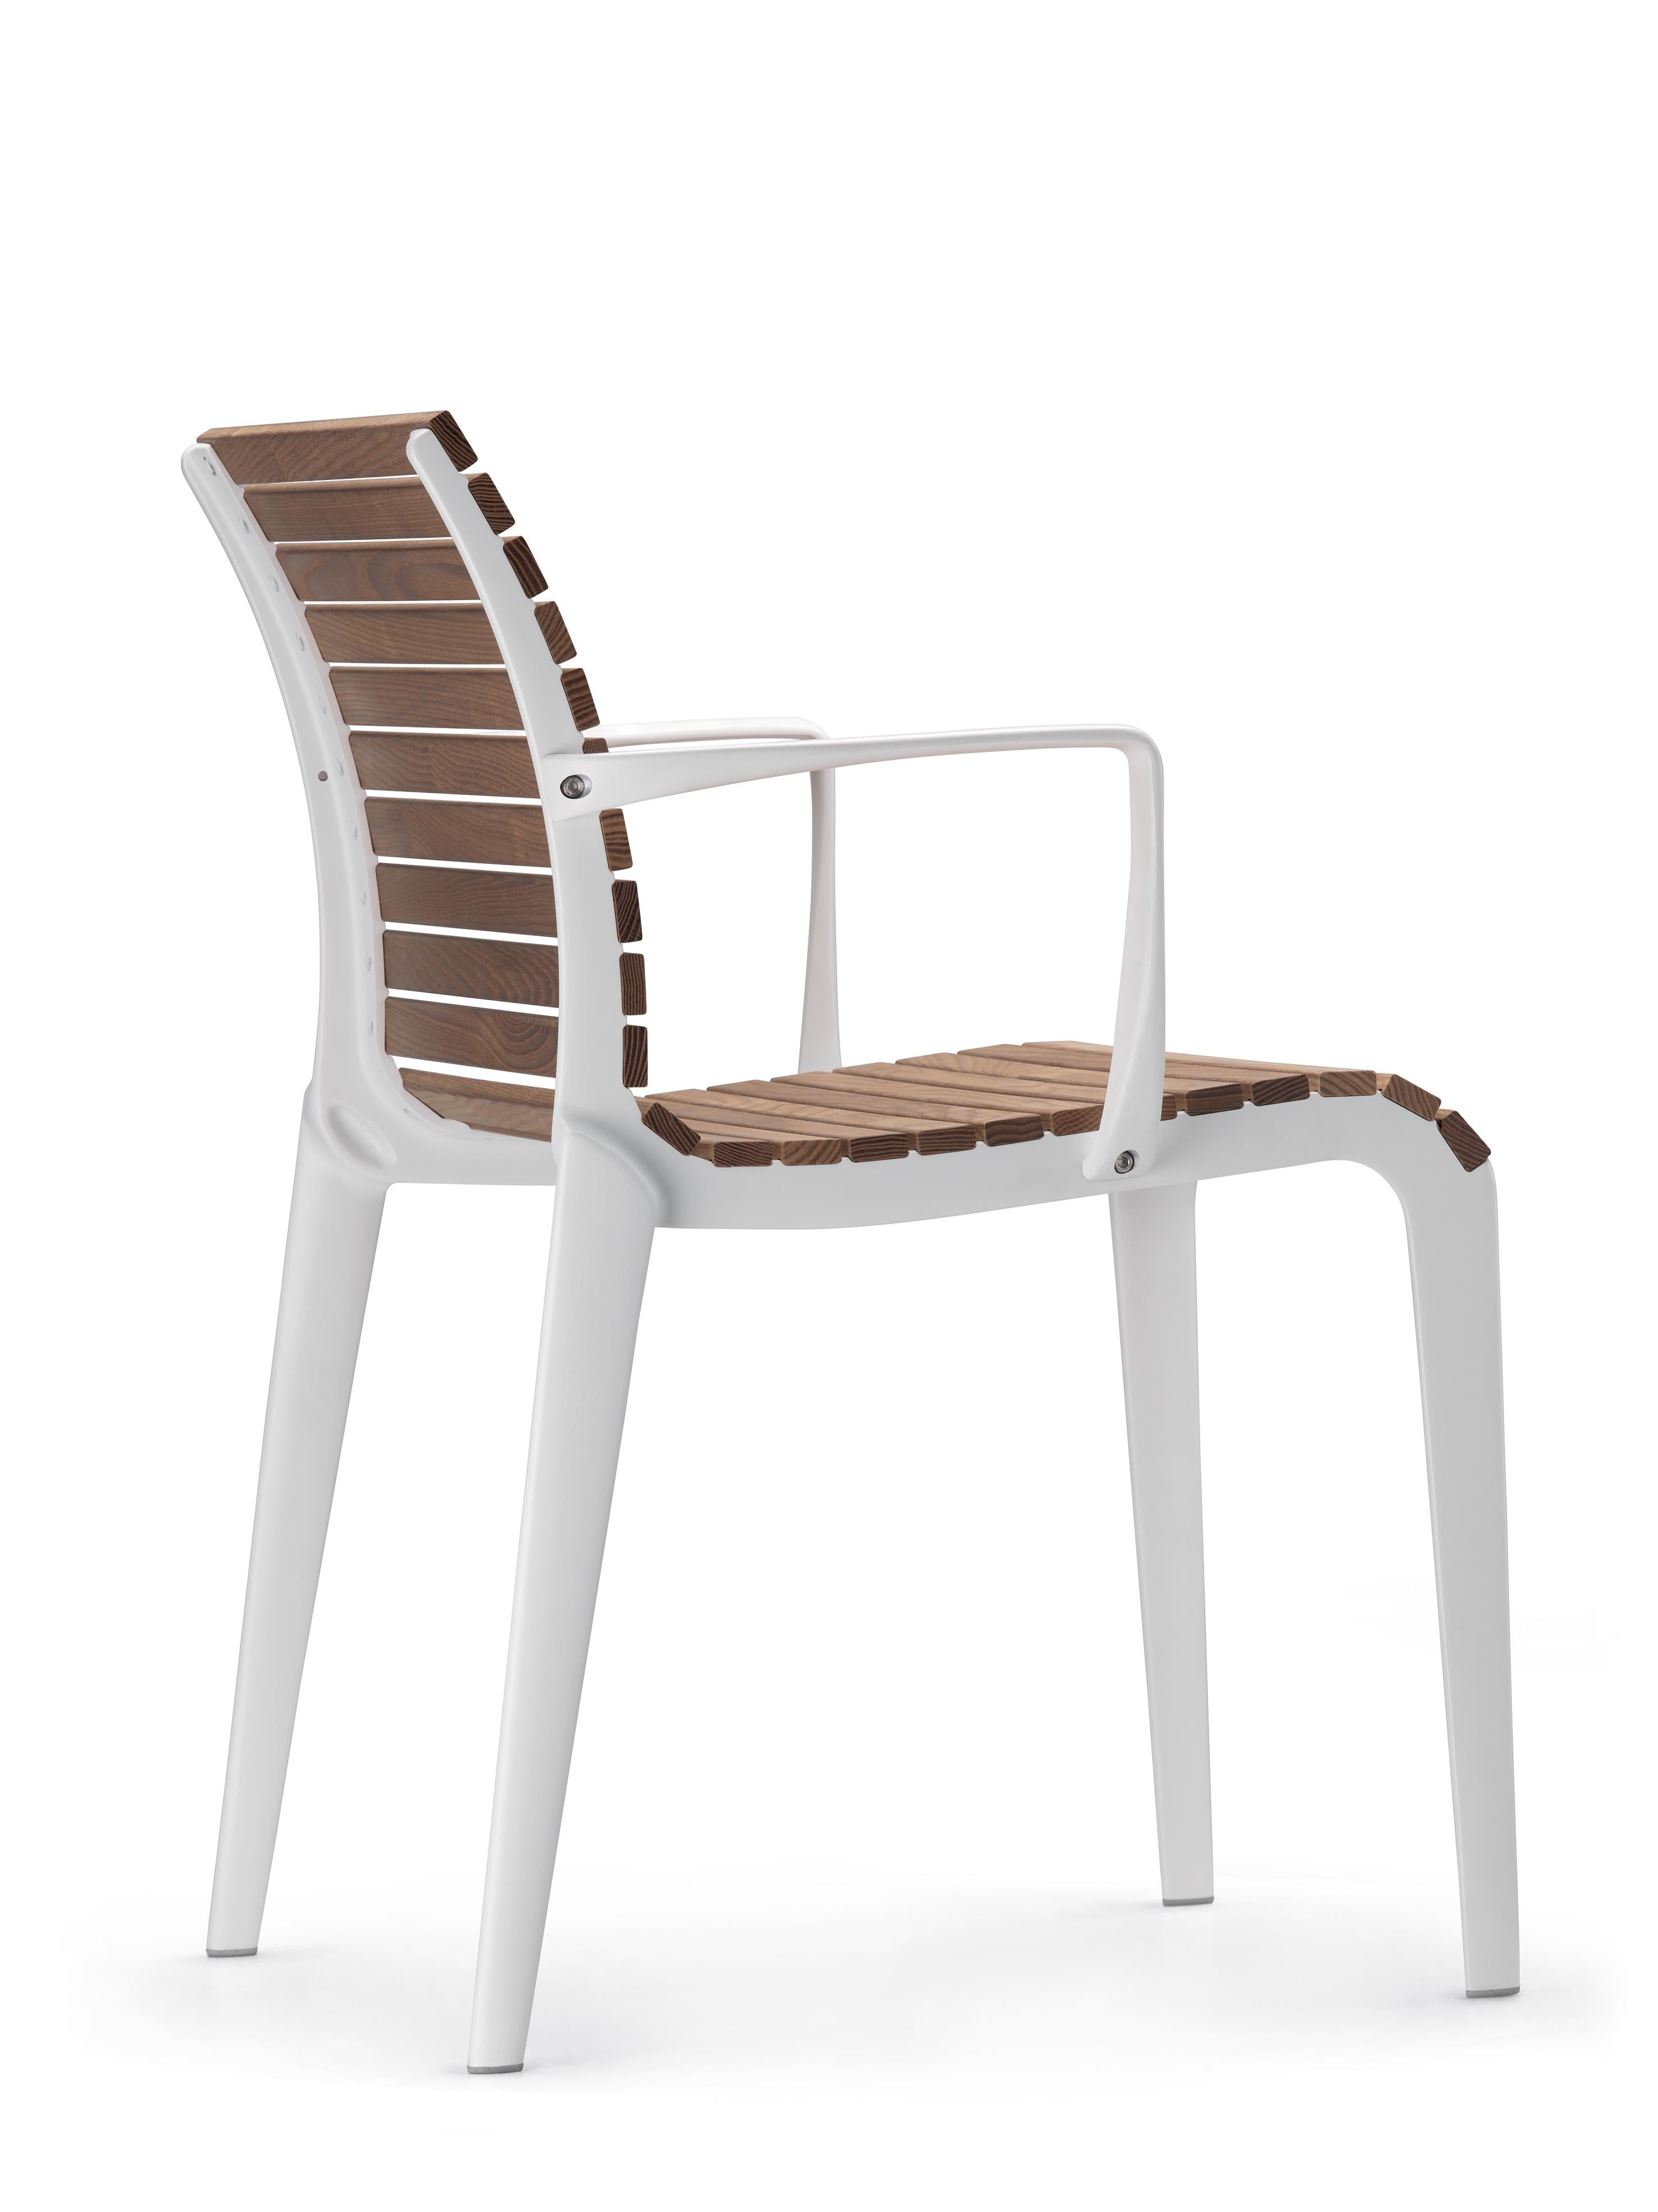 Alias Tech Wood Armchair in Teak and Lacquered Aluminium Frame by Alberto Meda

Chair with arms for outdoor use with structure in lacquered die-cast aluminium; seat and back in heattreated ash wood or raw teak slats. FSC® certified product